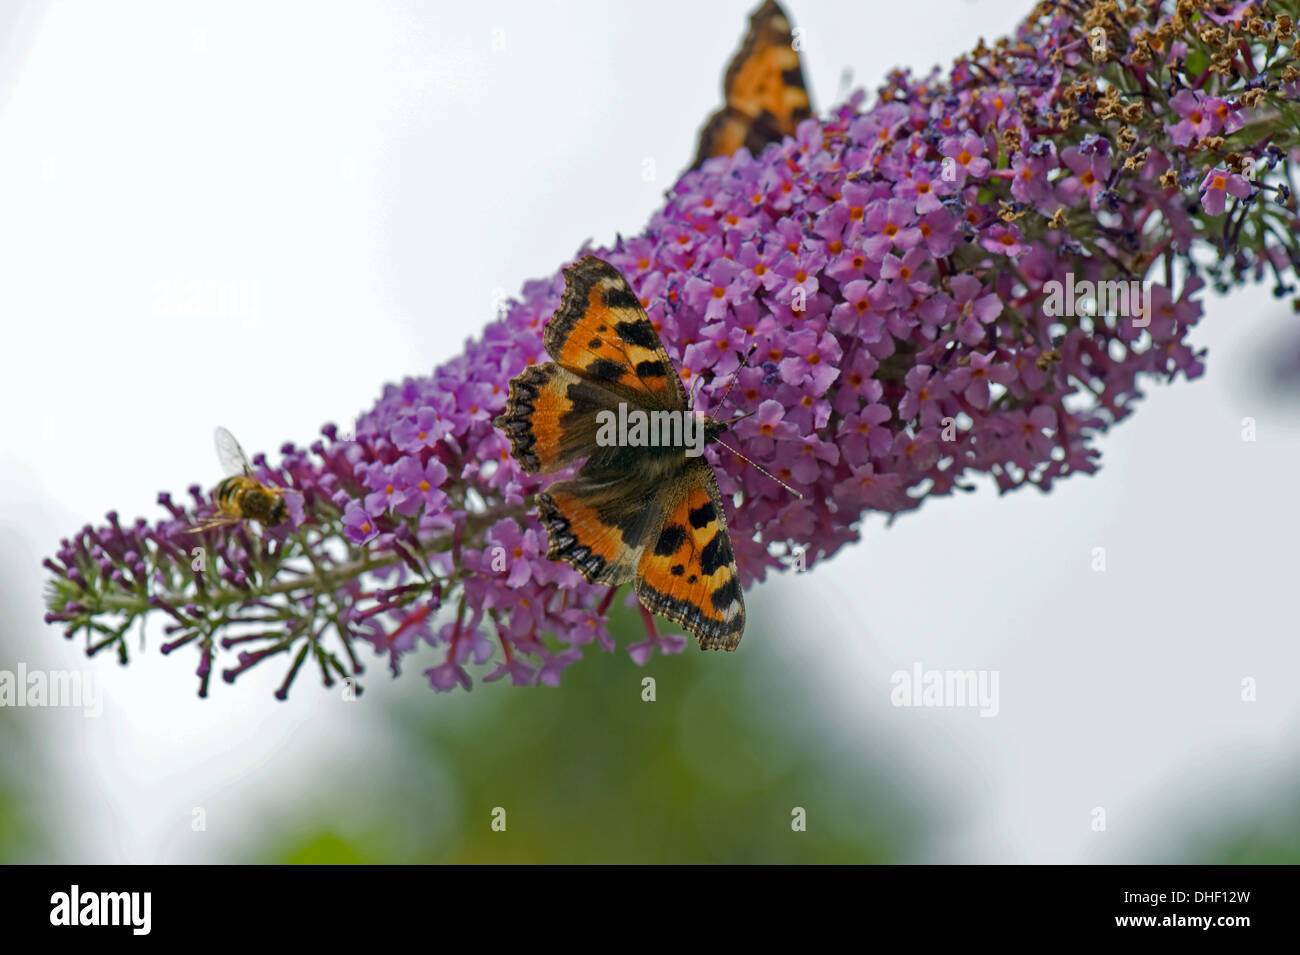 A small tortoiseshel butterfly, Aglais urticae, withothes and a drone fly on a Buddleja davidii flower Stock Photo